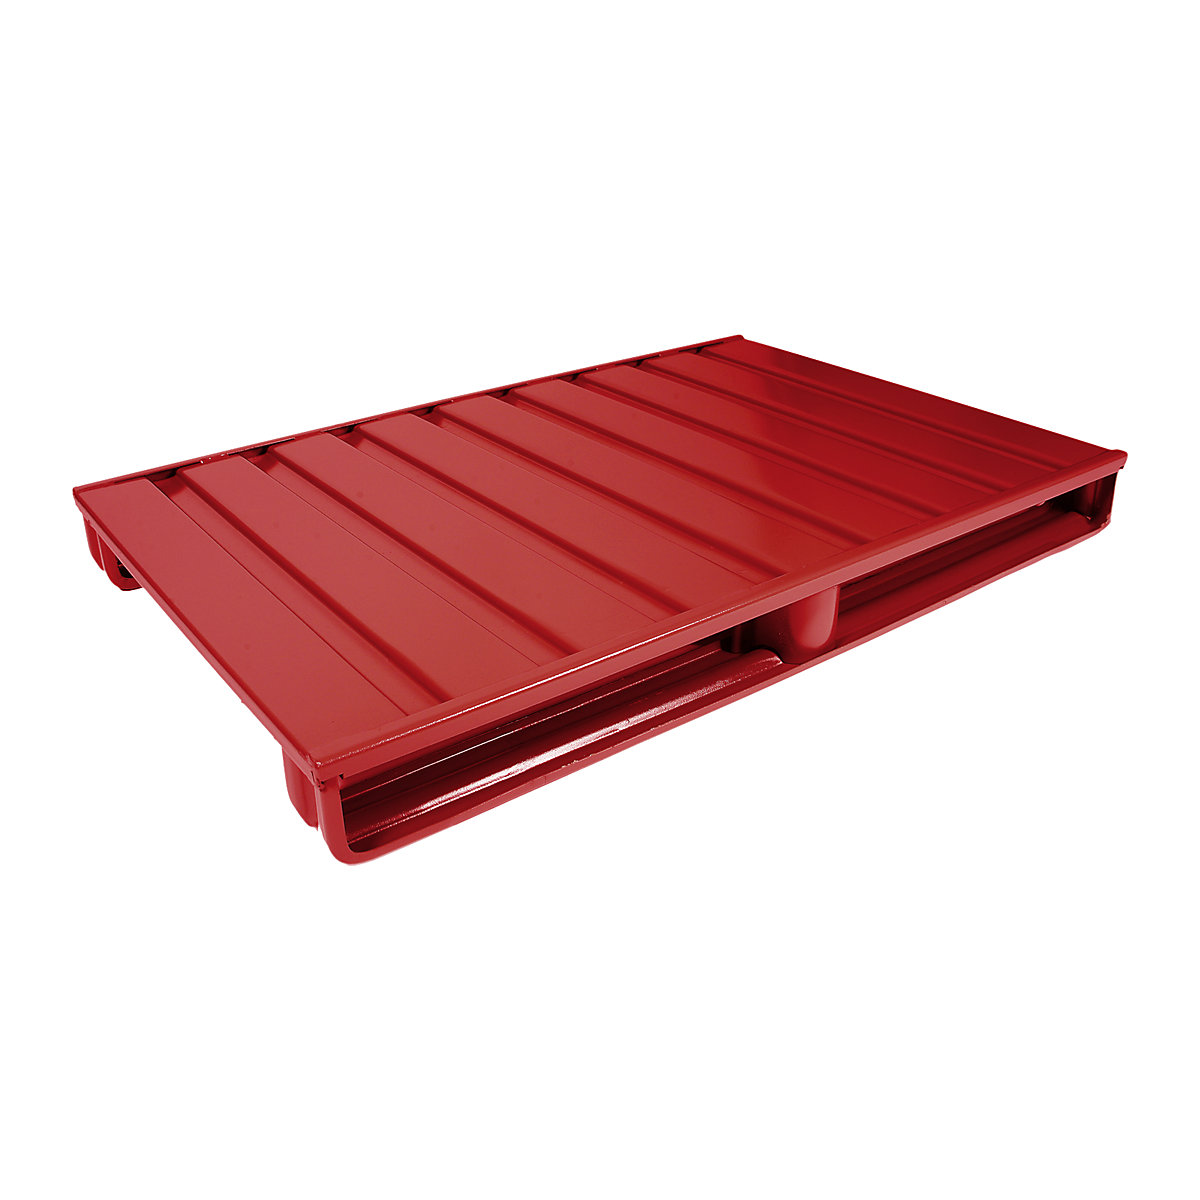 Flat steel pallet – Heson, LxW 1200 x 1000 mm, max. load 1500 kg, flame red, 10+ items-3